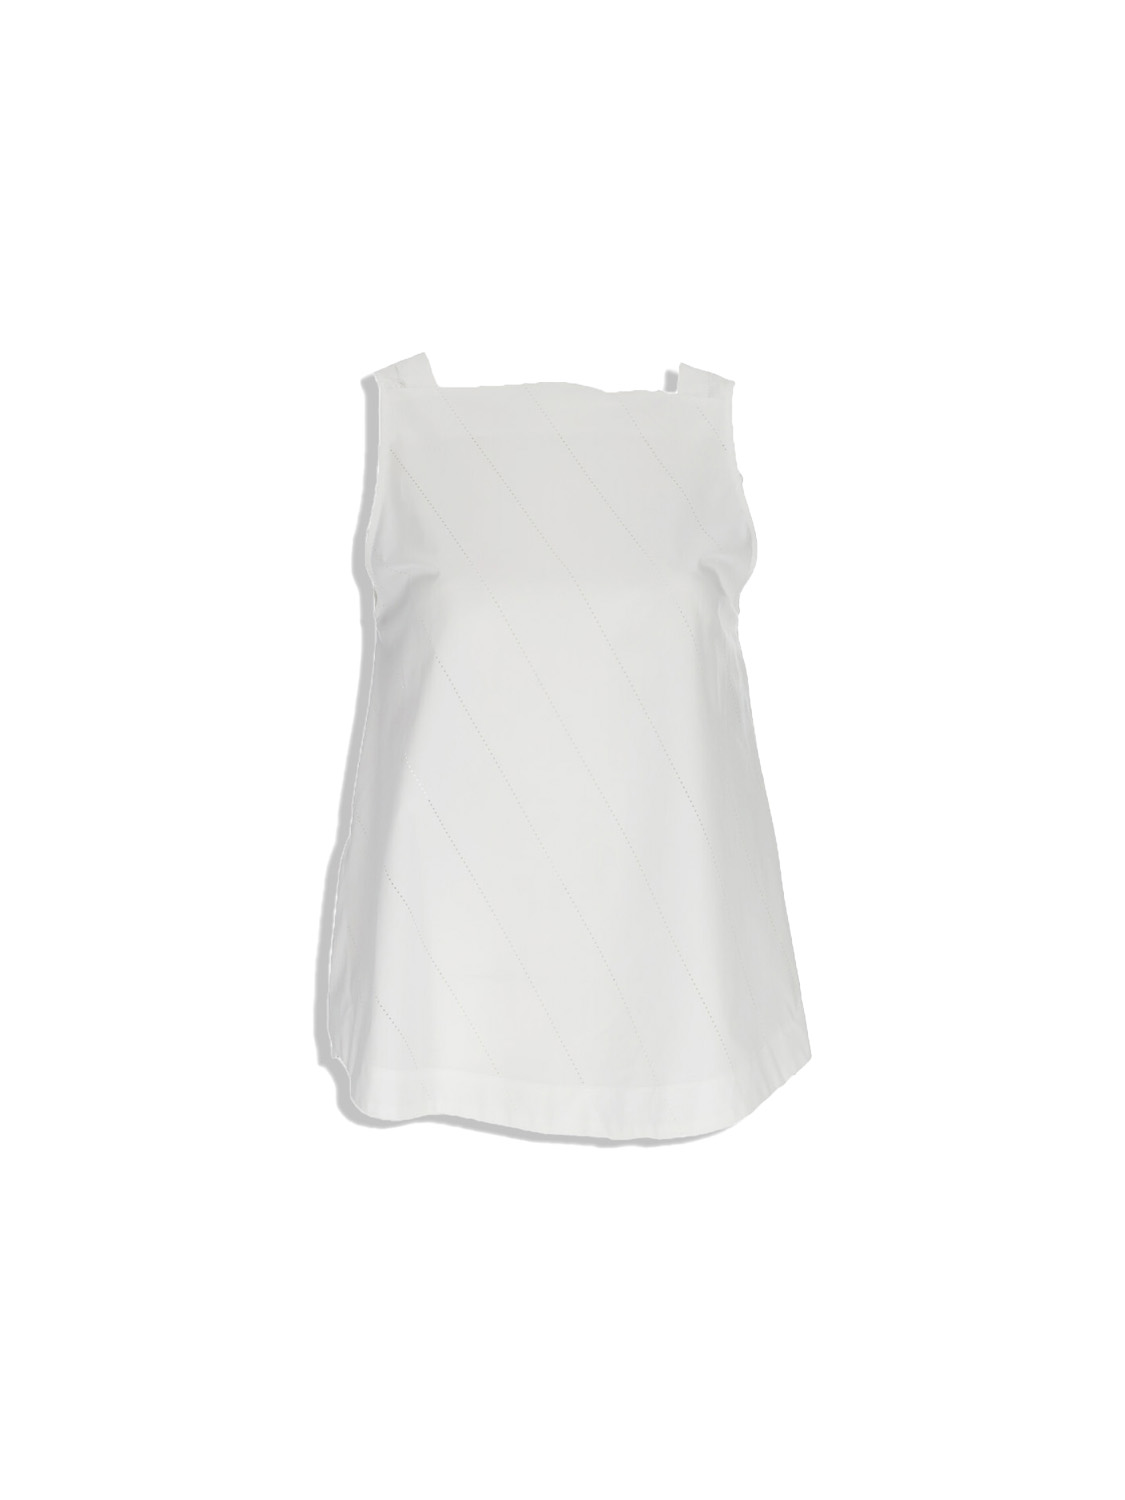 Sleeveless blouse with perforated design in cotton